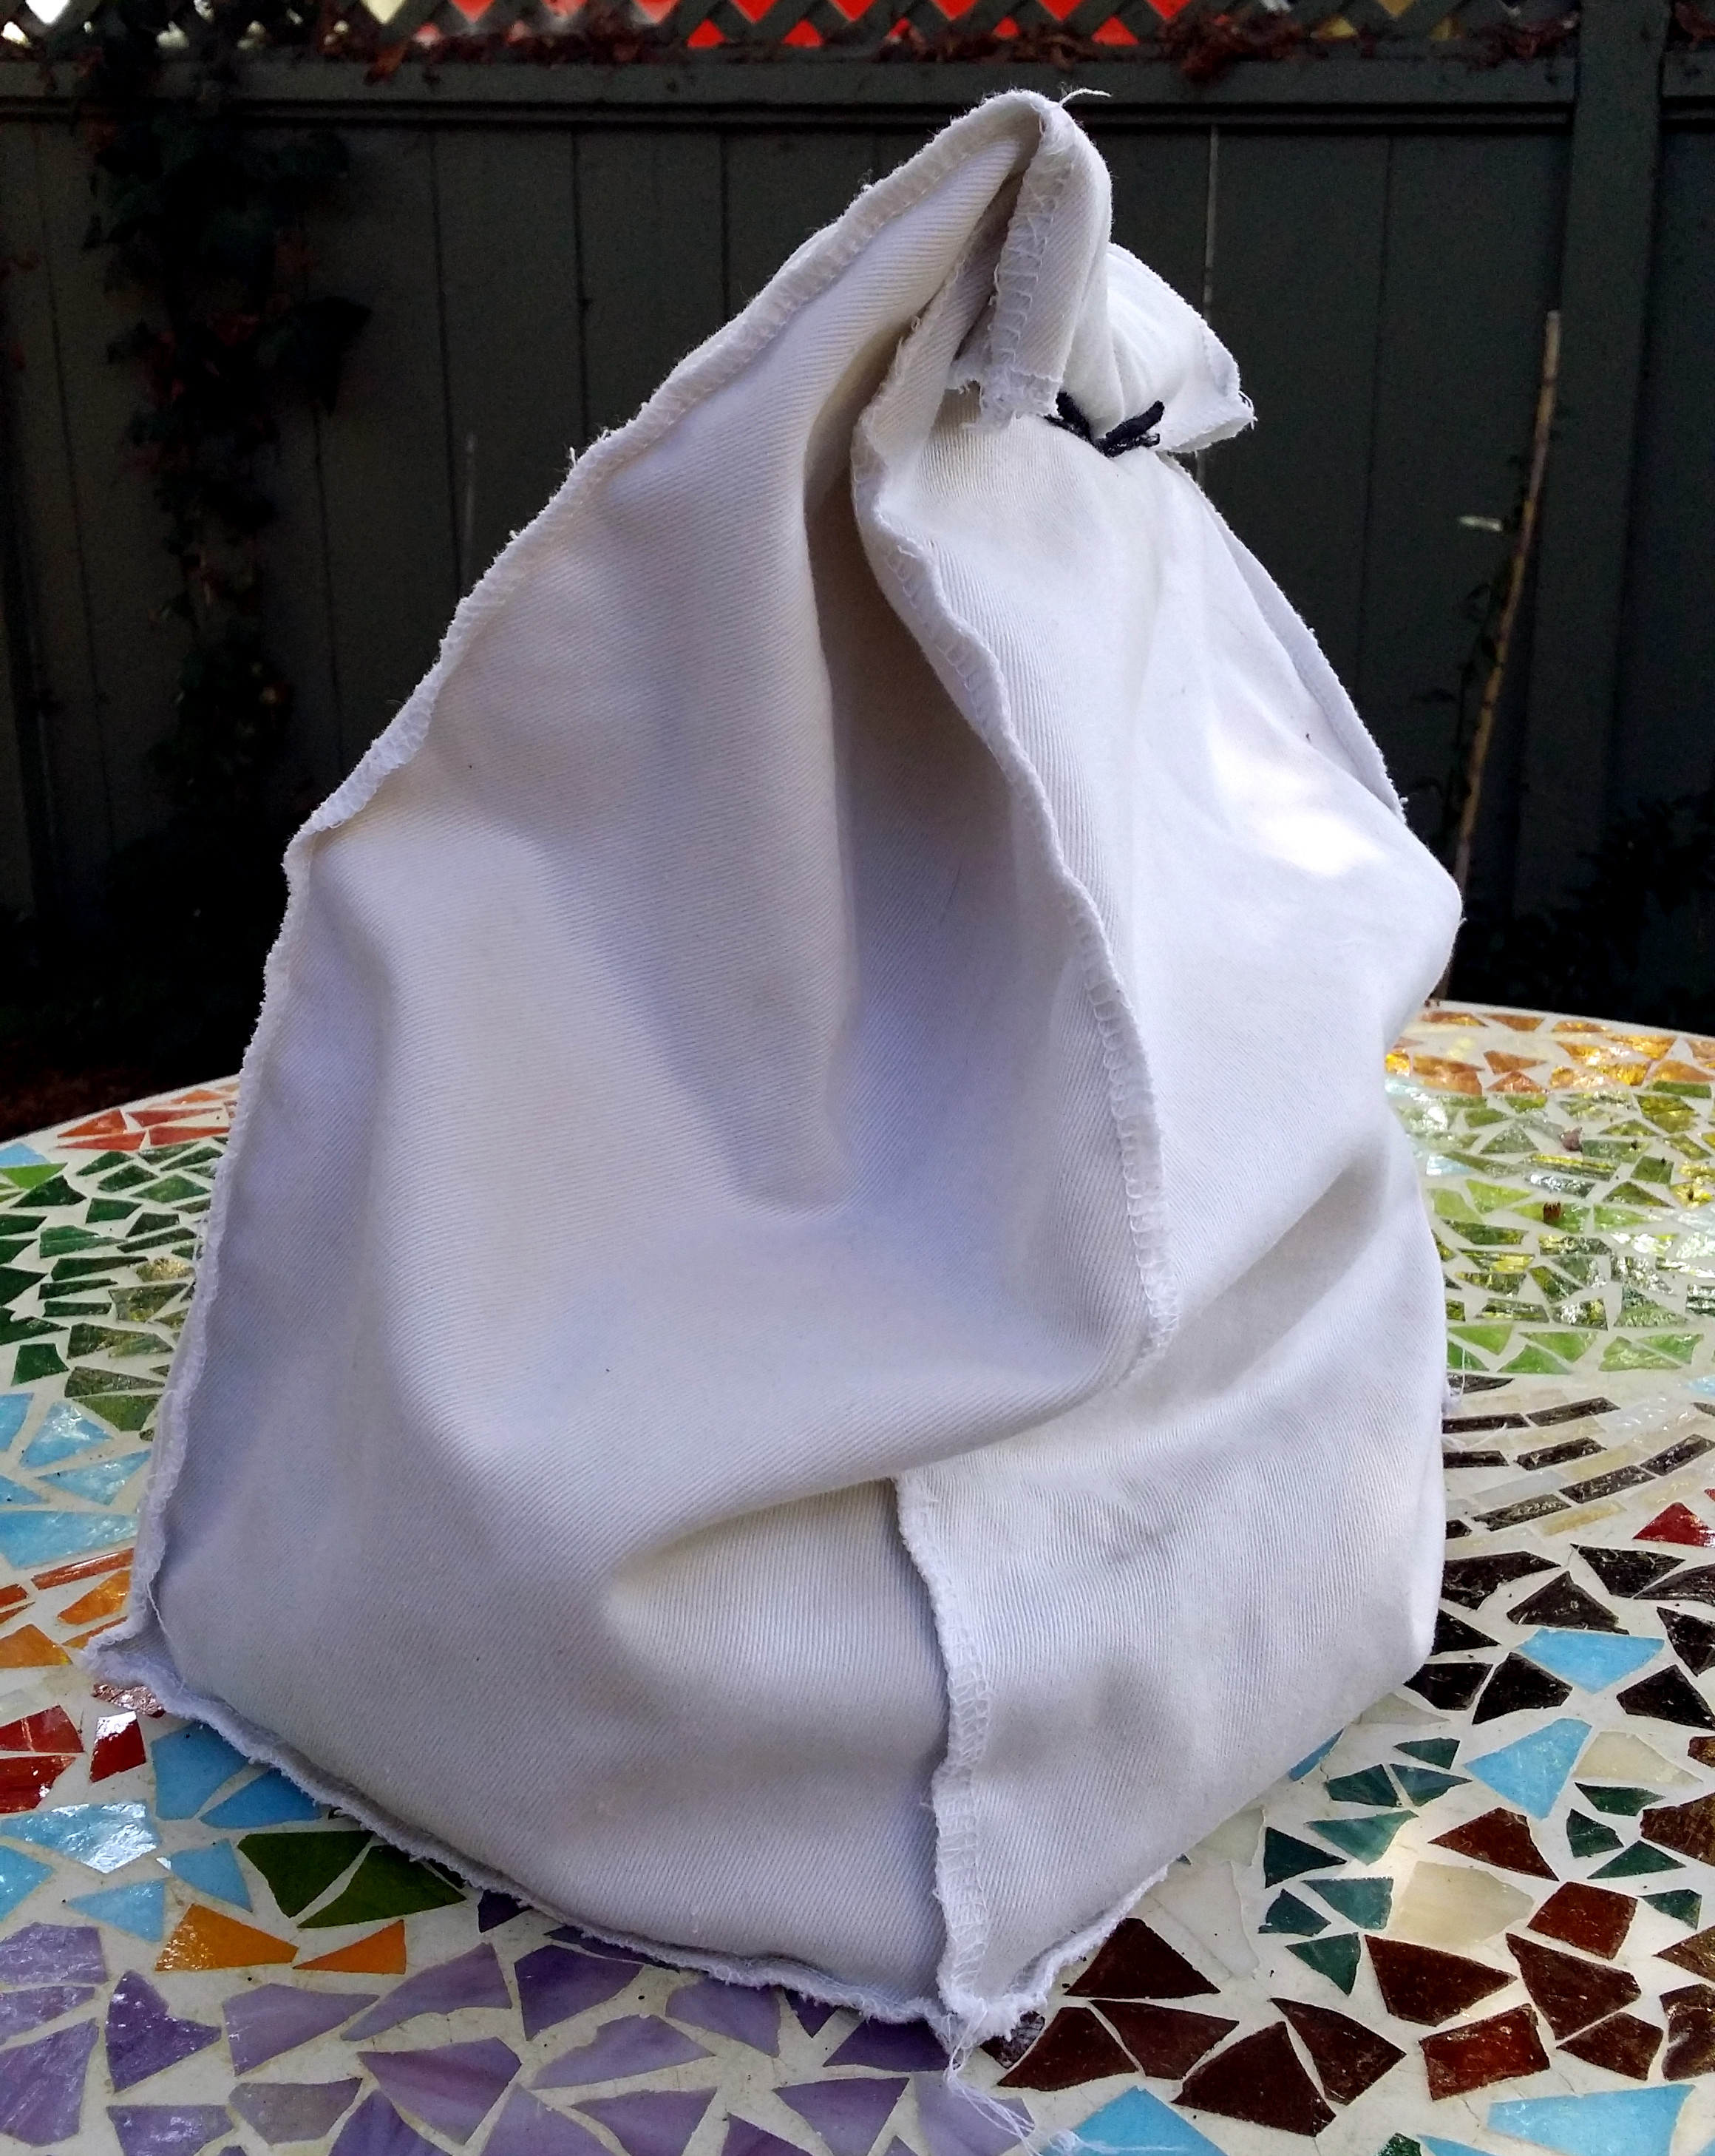 Tips for Using Cloth Napkins - Day 18 of the Zero Waste Challenge